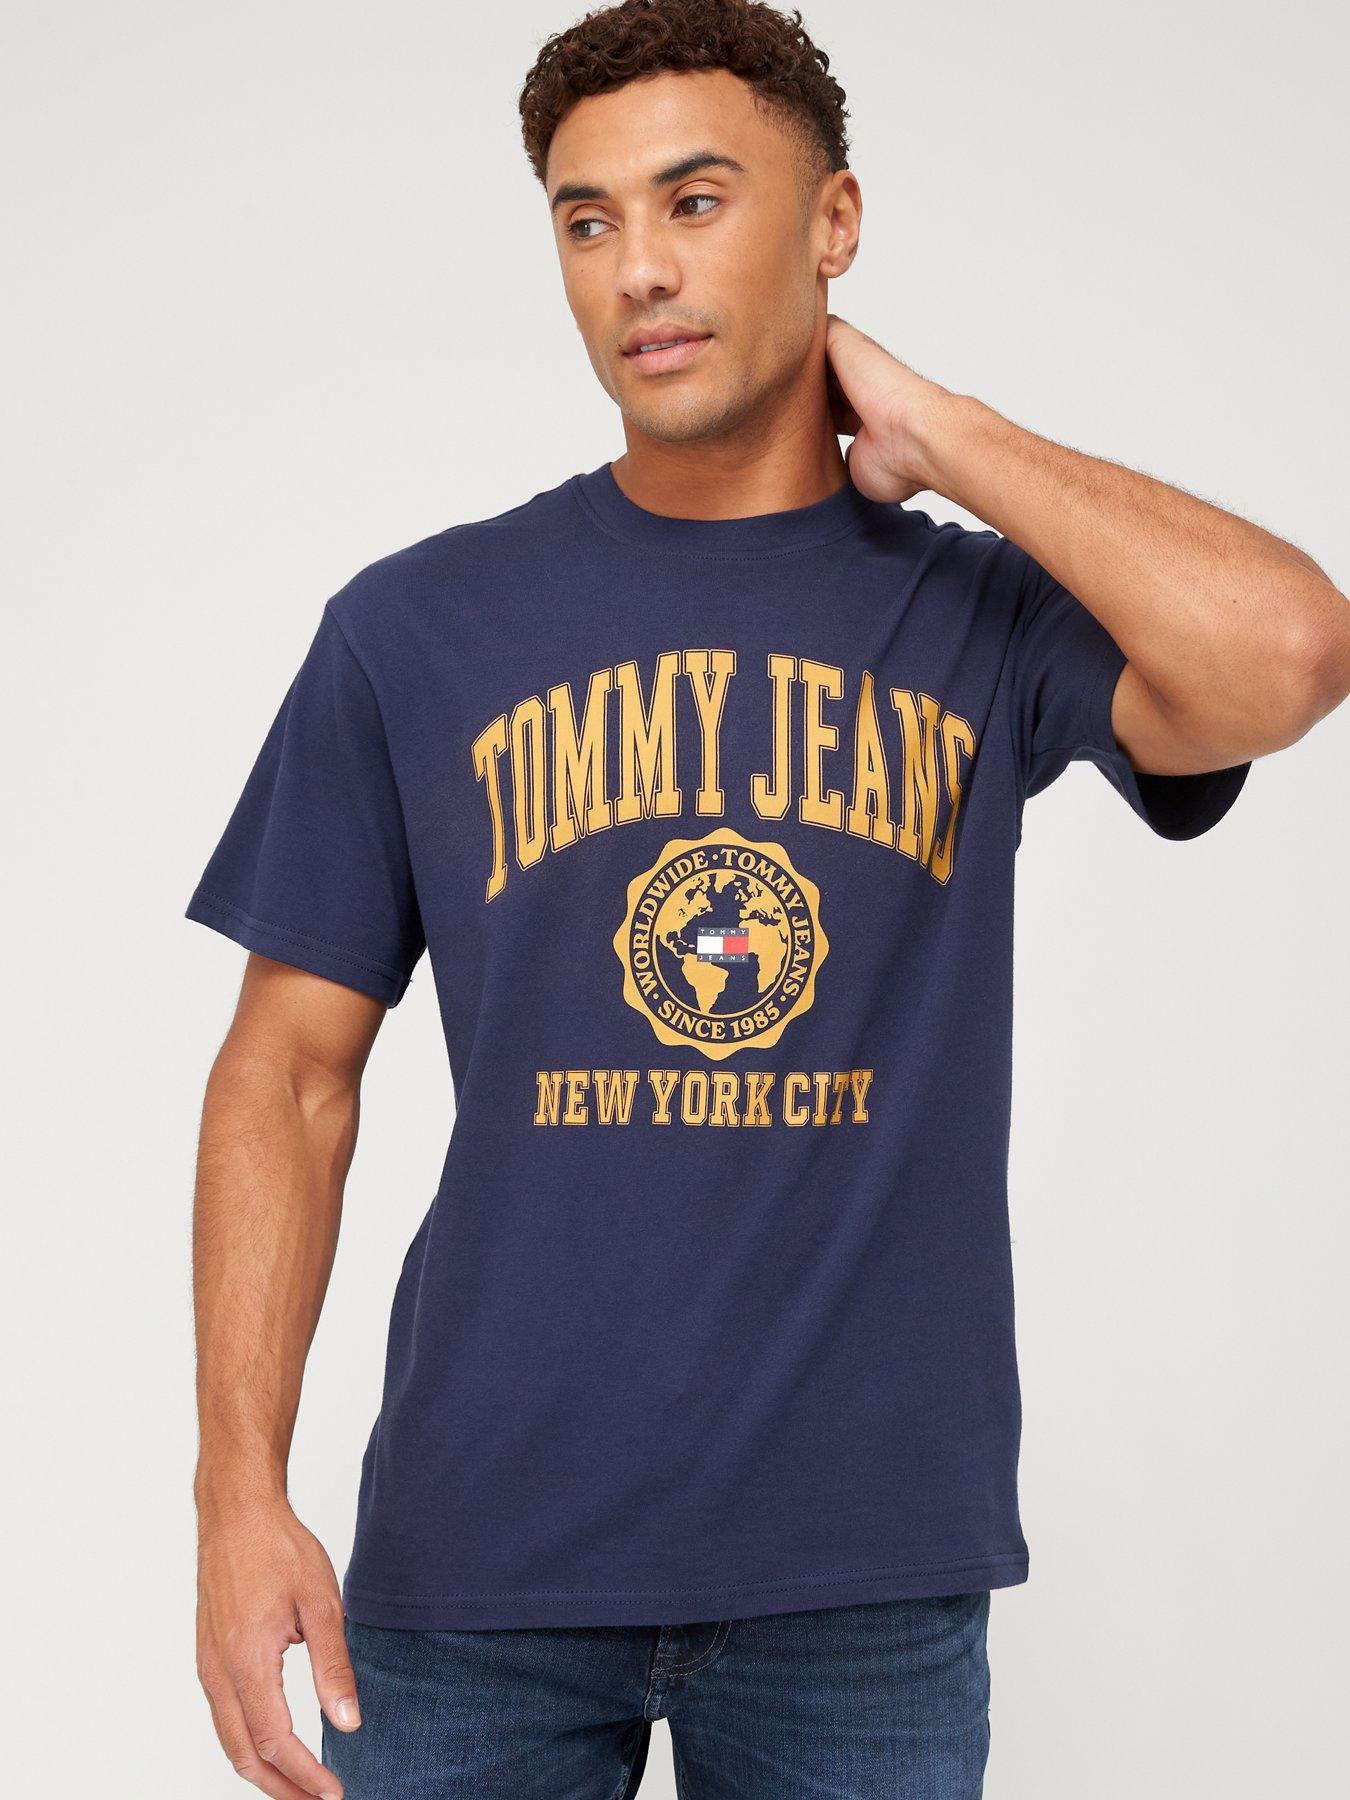 Huge Savings on | College Logo T-Shirt - Twilight Navy Tommy Jeans New  Threads Sale at